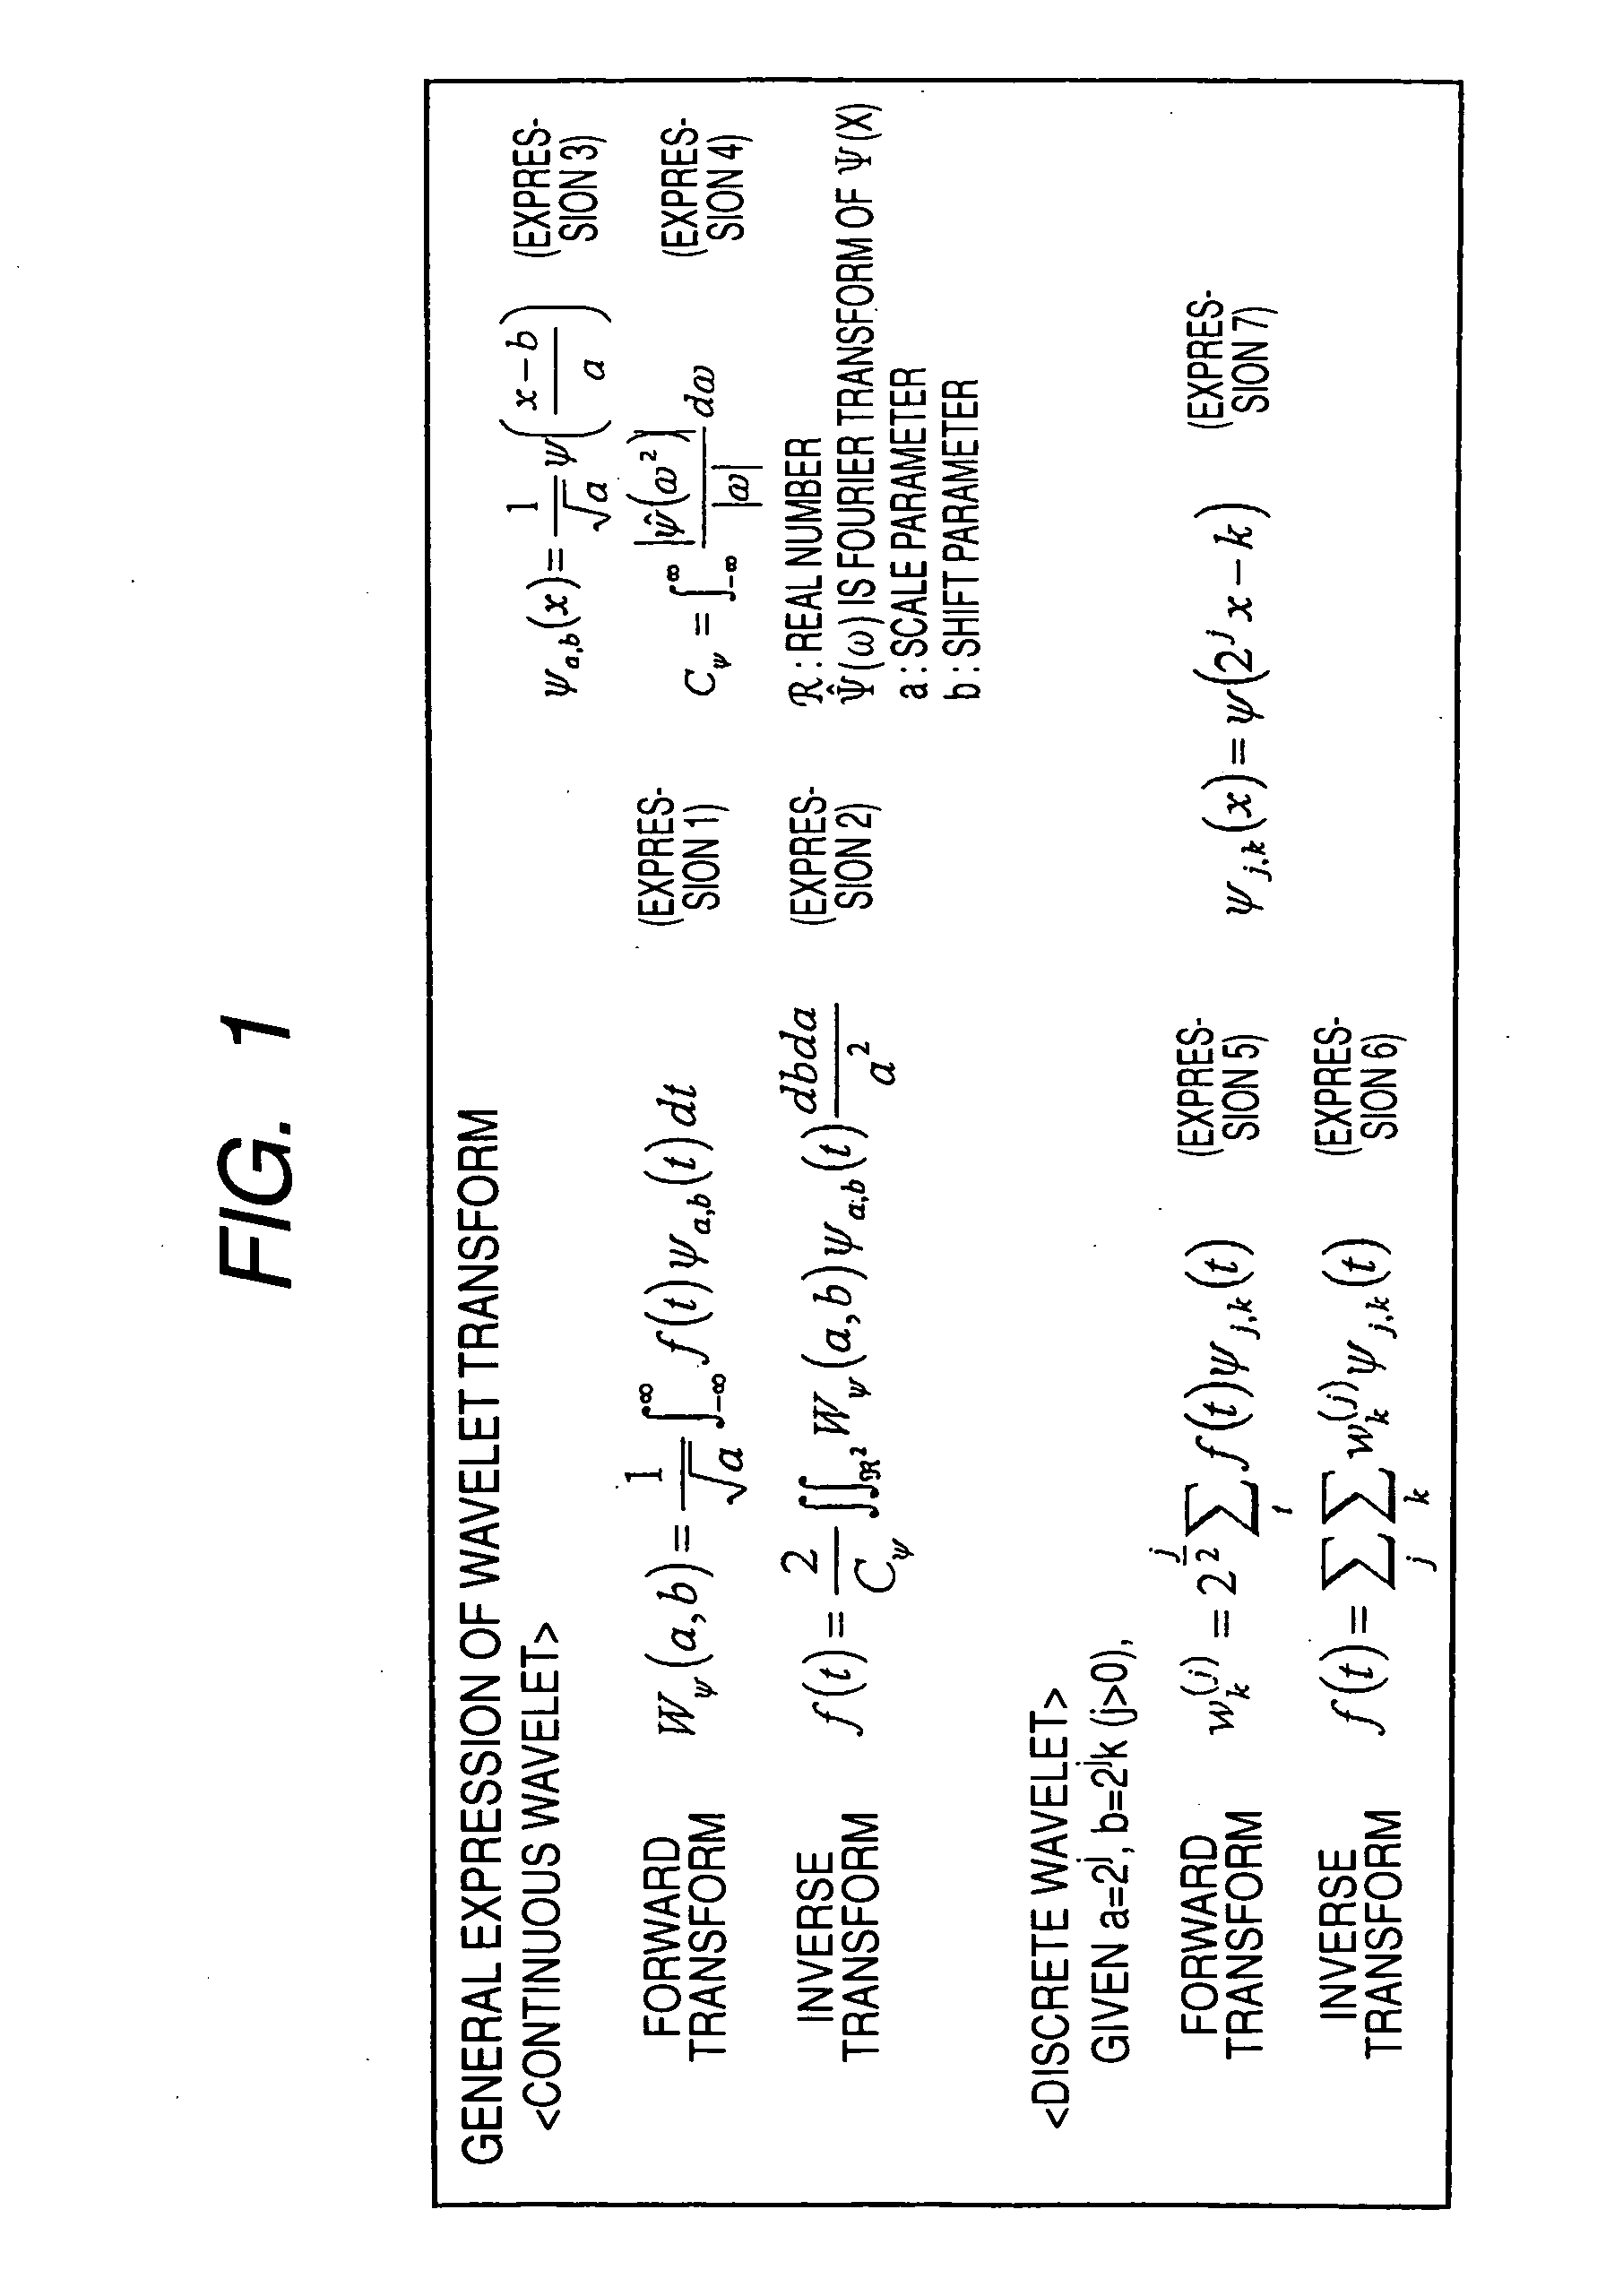 Traffic information providing system, a traffic information expressing method and device